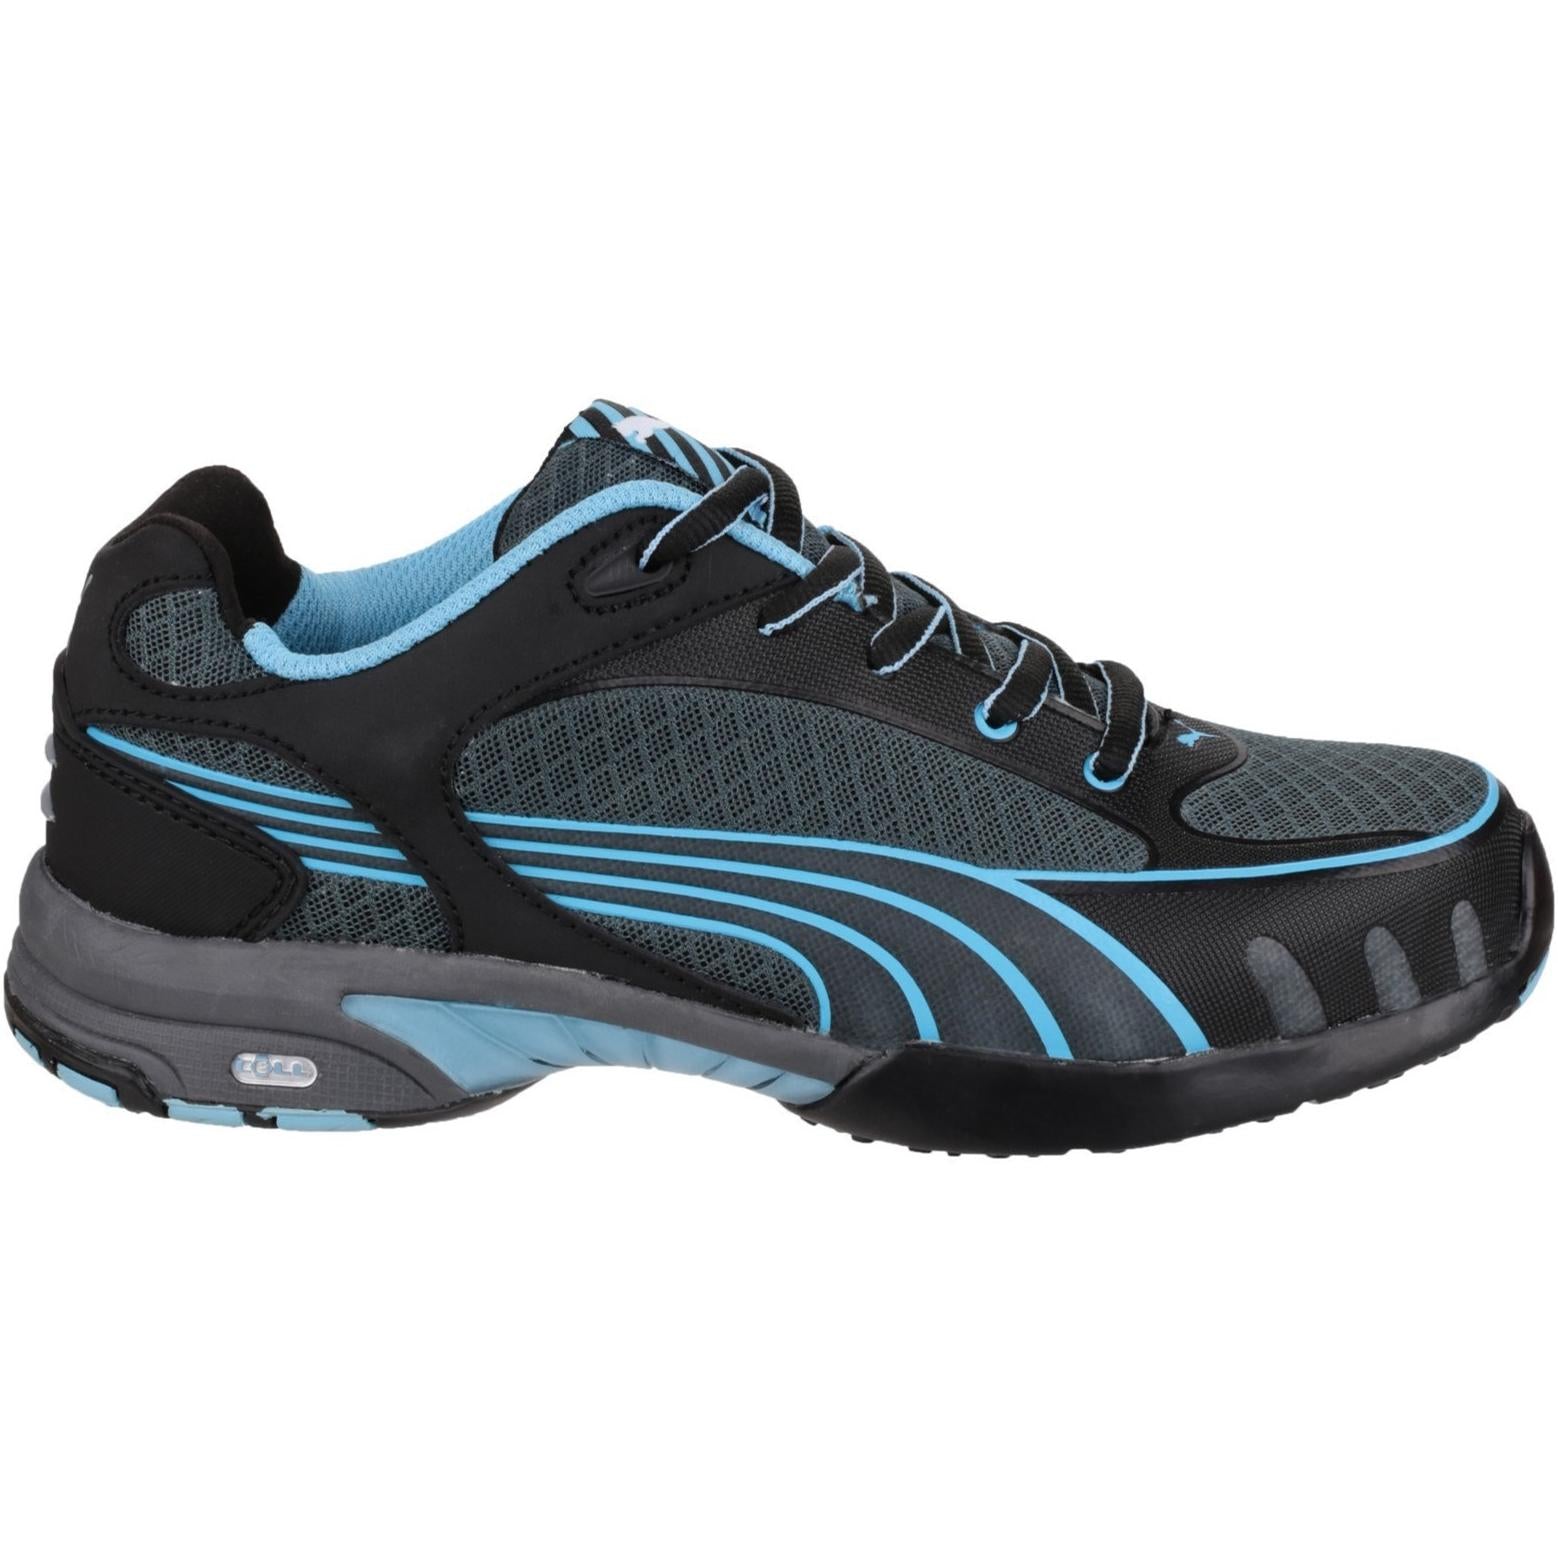 Puma Safety Fuse Motion Womens Safety Shoe